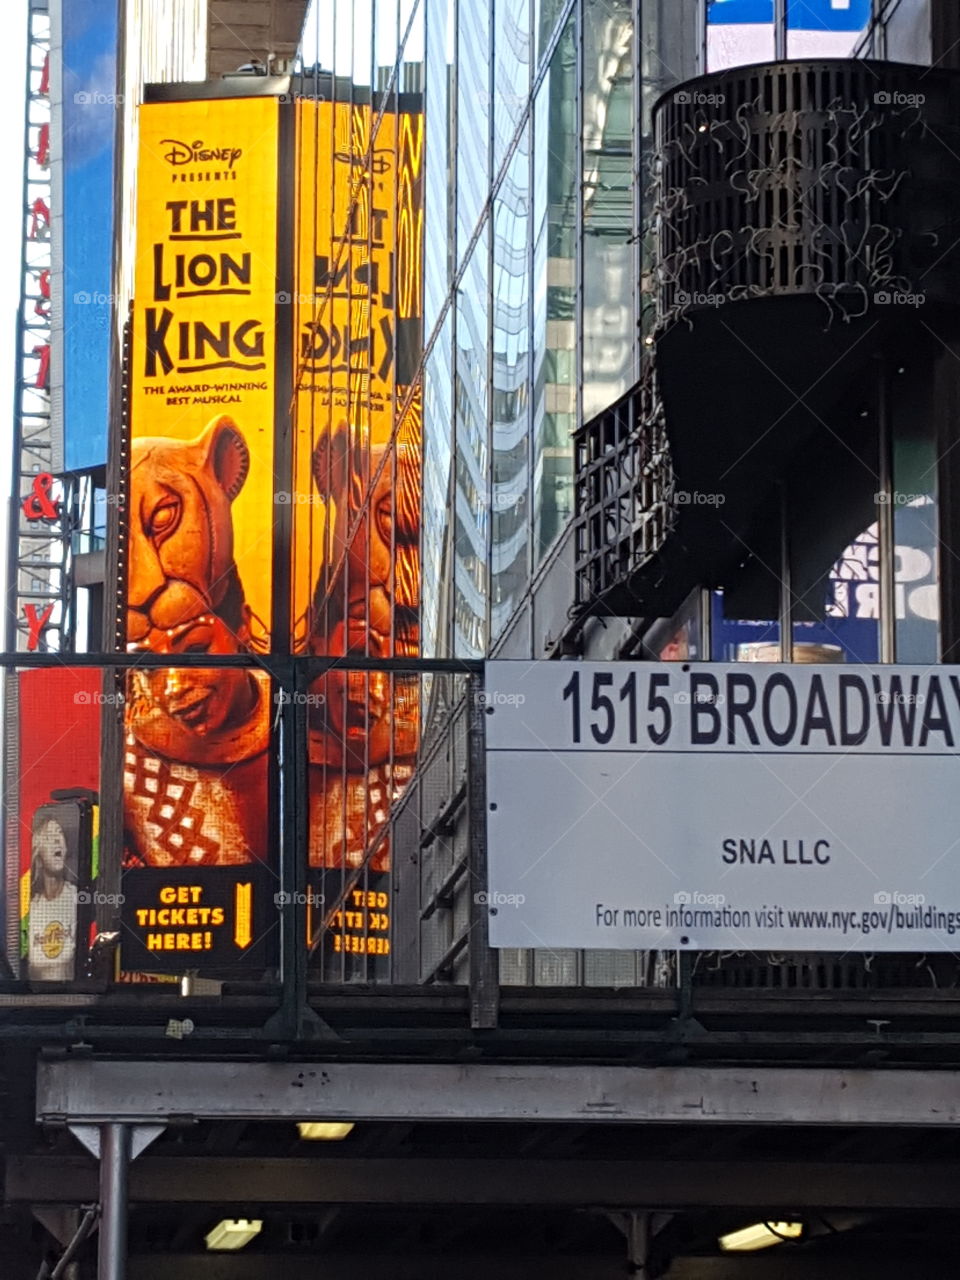 A sign advertises"The Lion King"Broadway stage show in New York City.